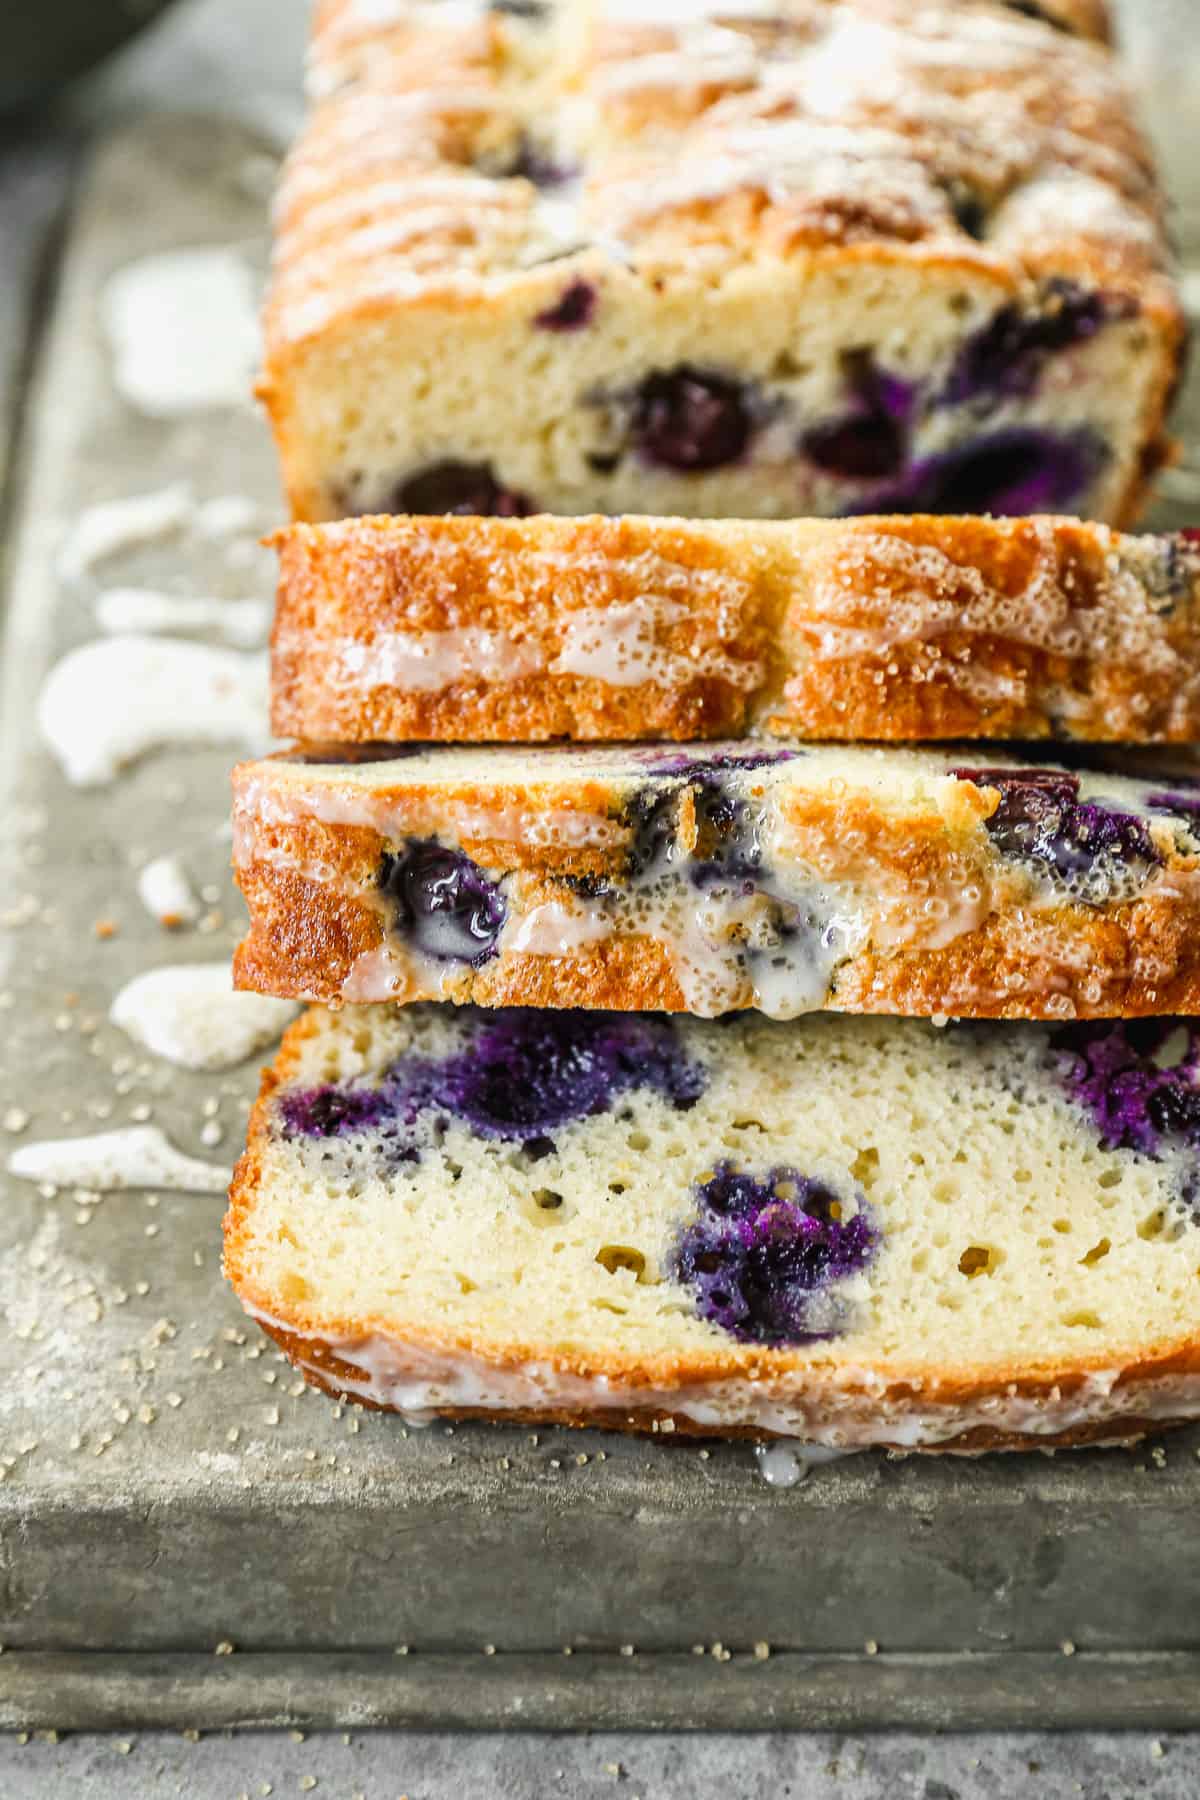 A close-up image of a sliced Lemon Blueberry loaf with a glaze drizzled on top.